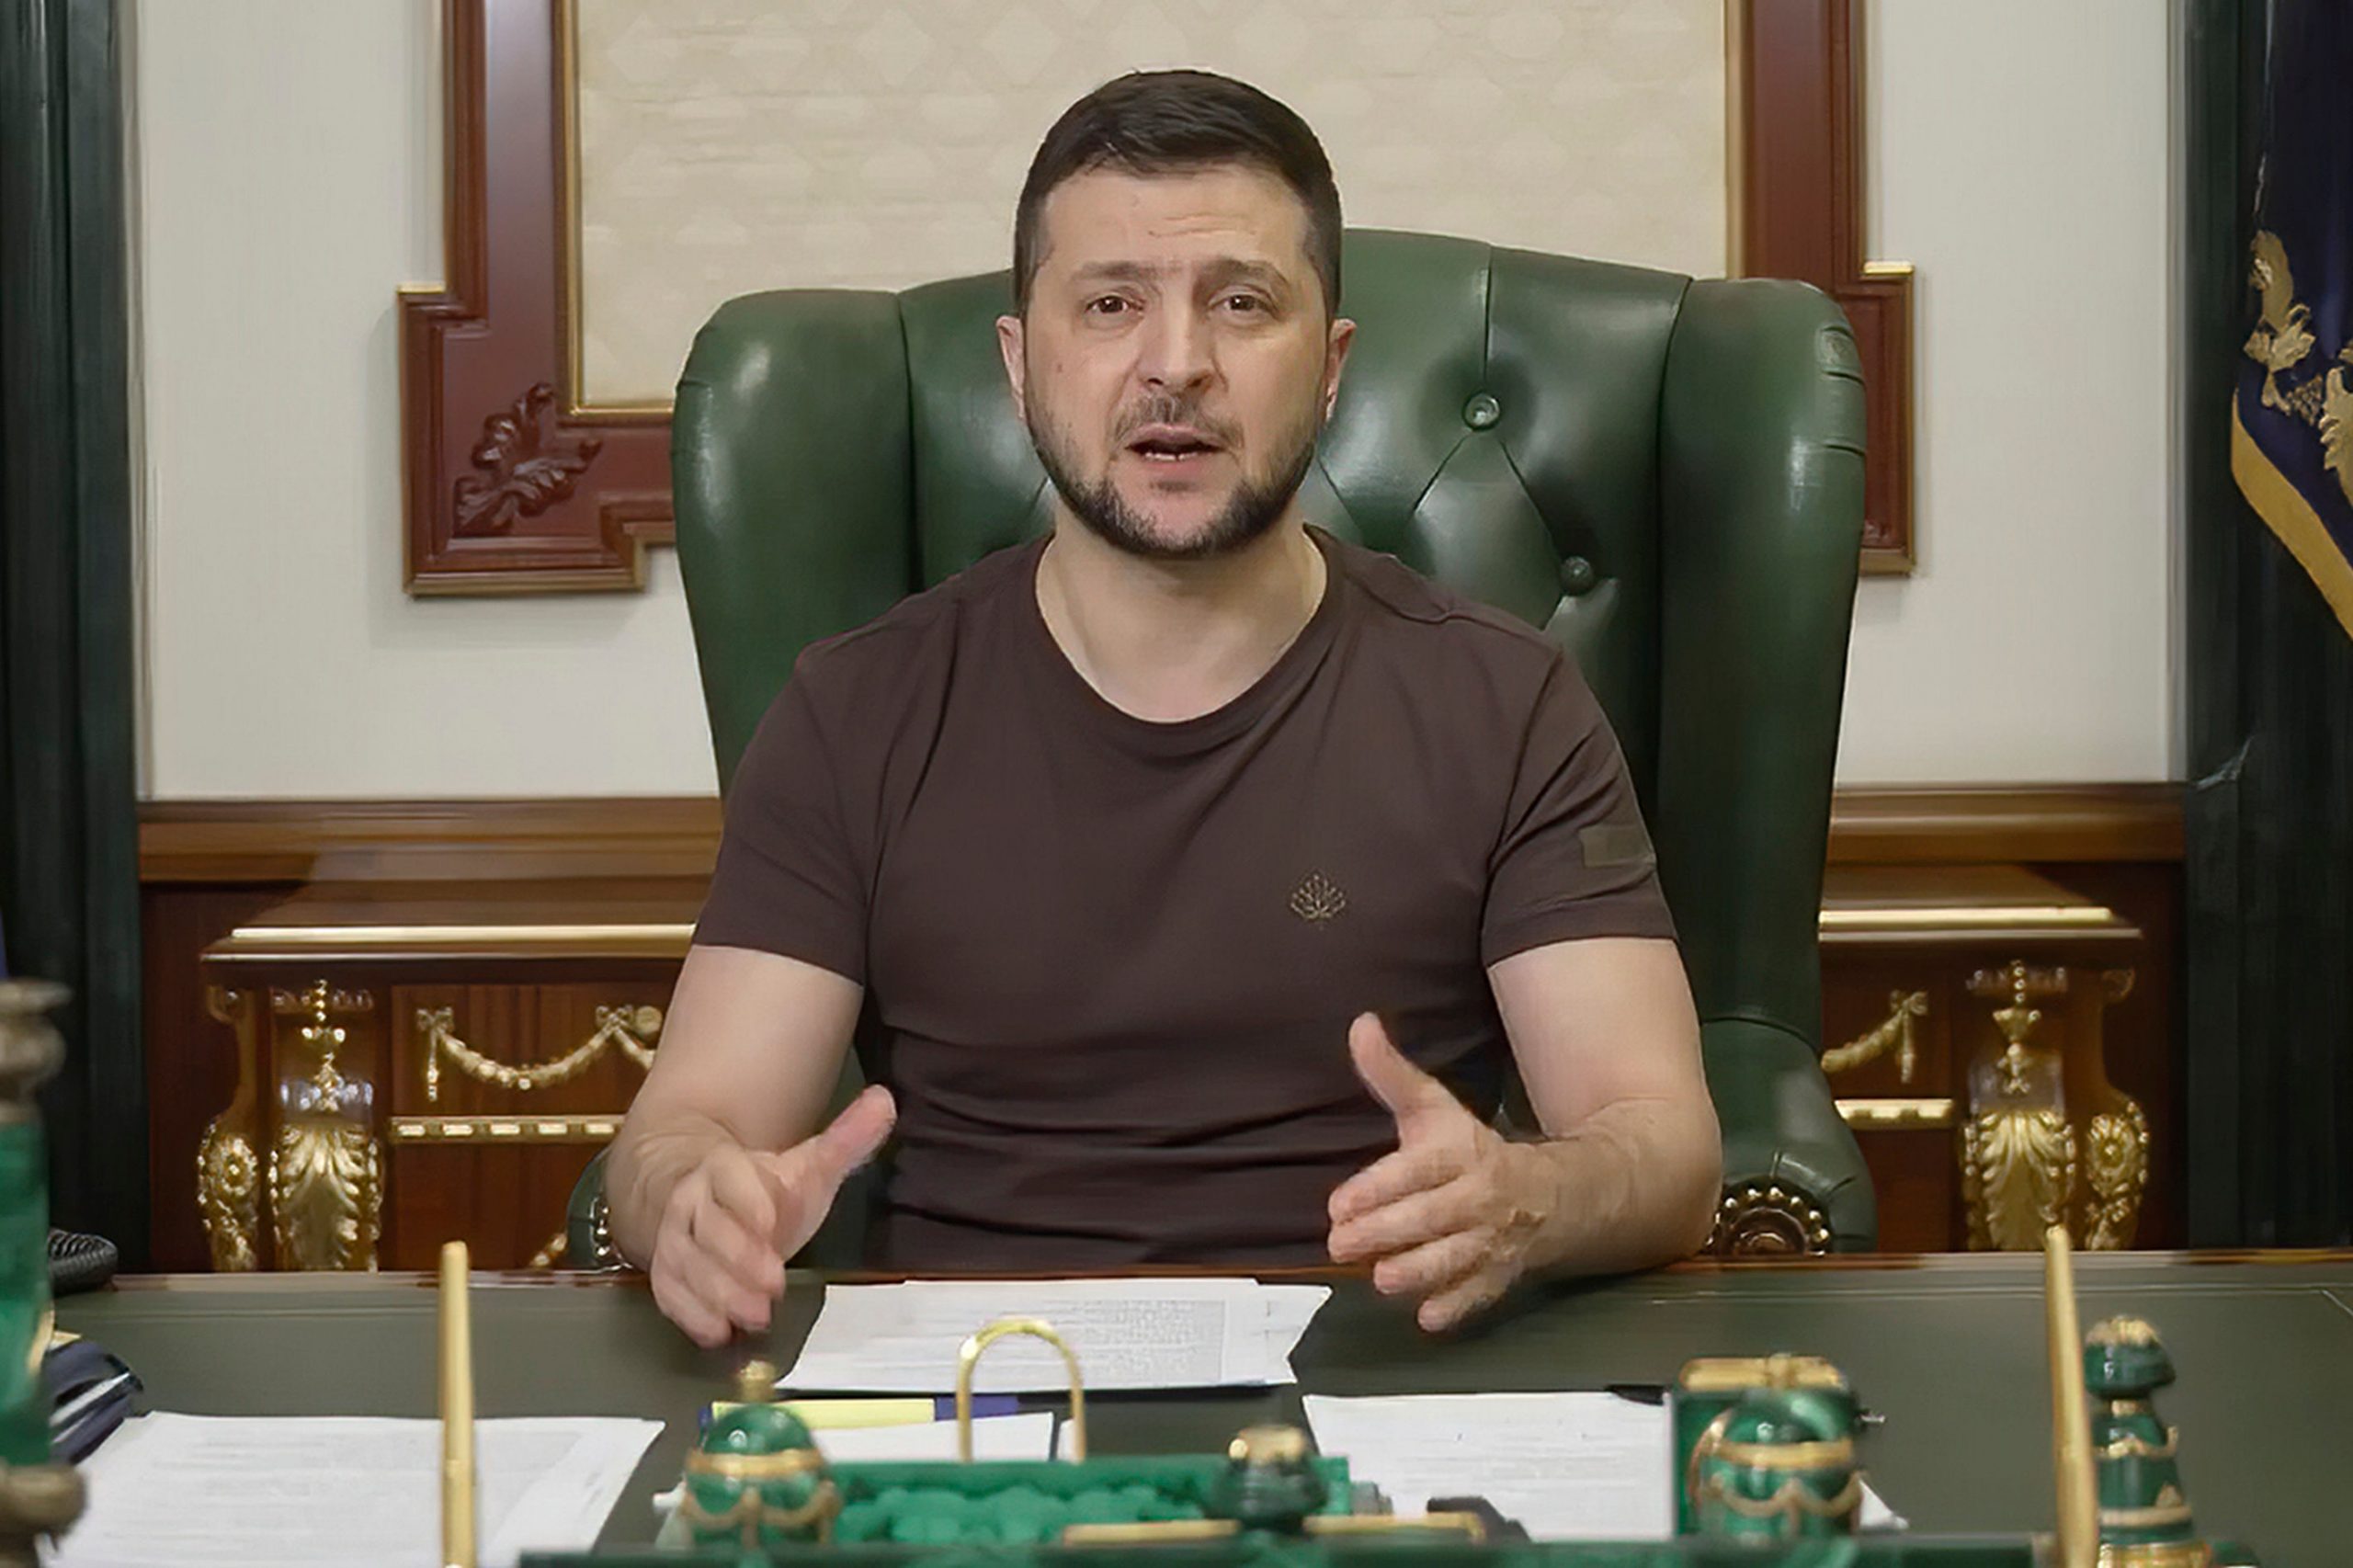 Ukraine cannot trust Russia that is ‘still pursuing our annihilation,’ says Zelensky